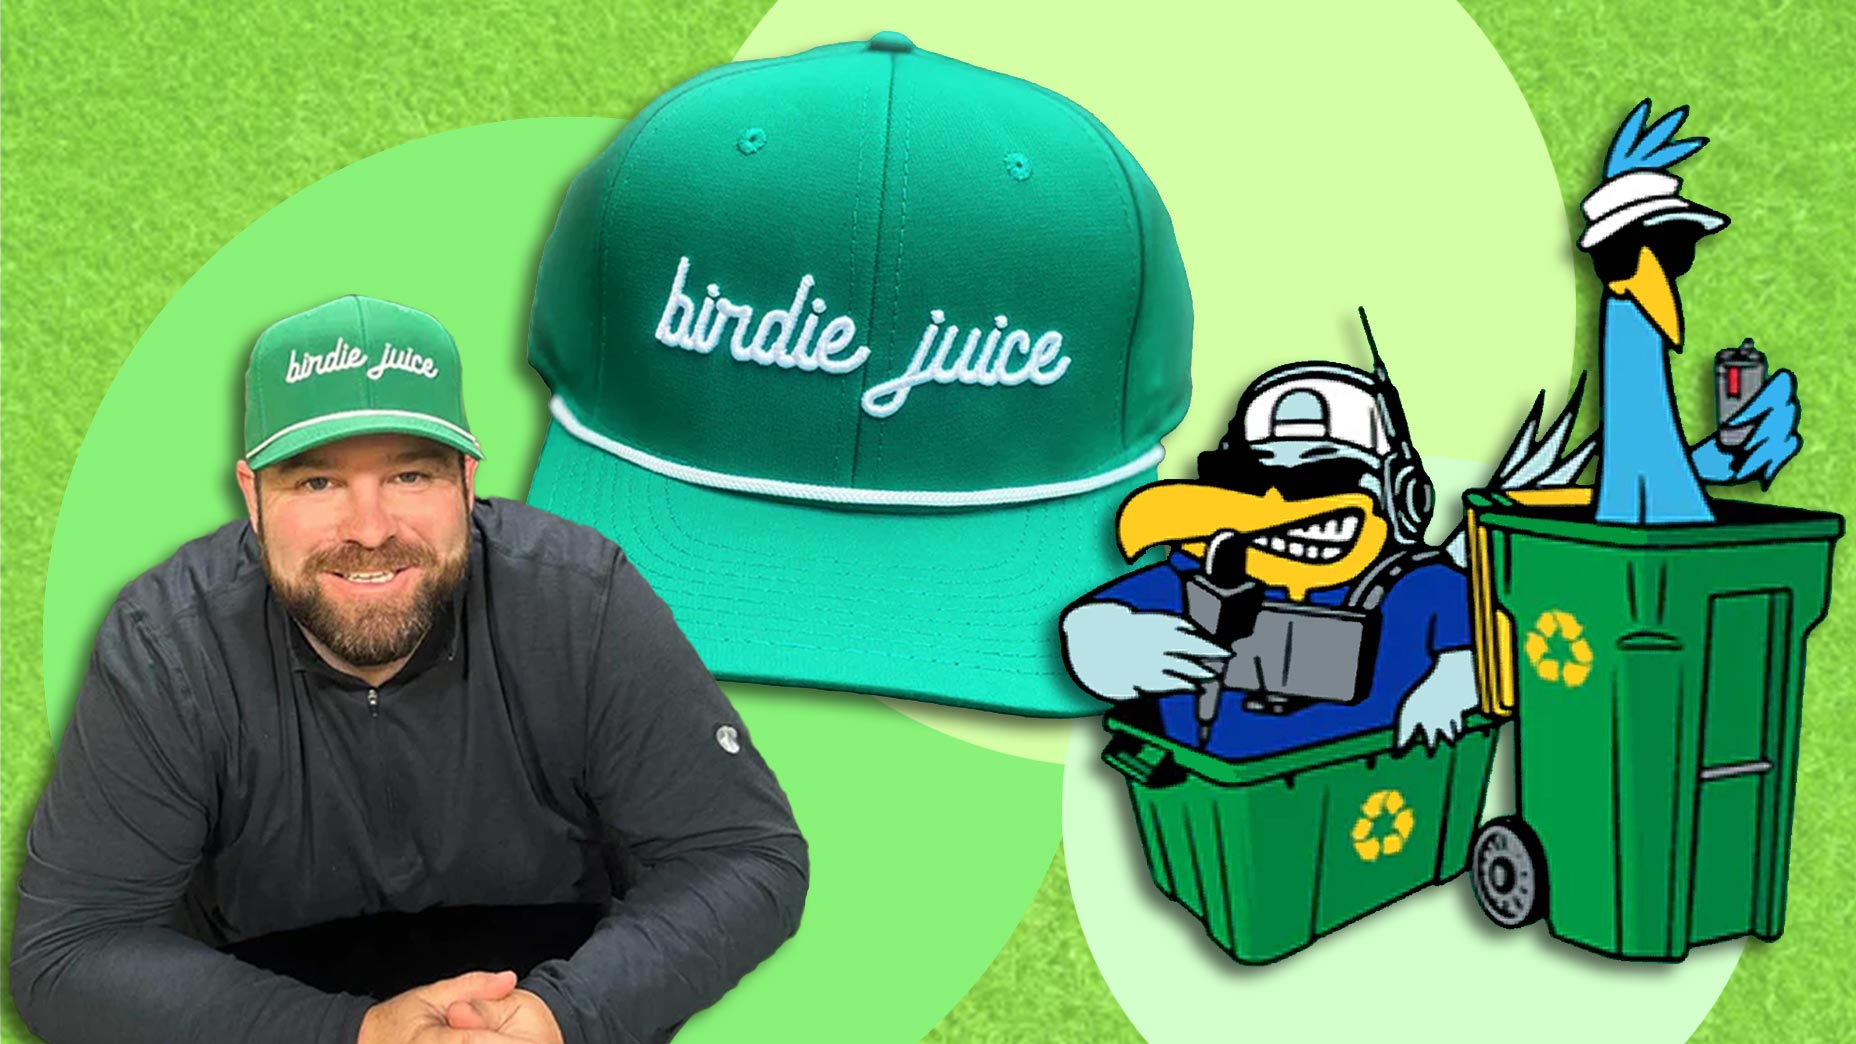 Show your love for Birdie Juice, and join in watching the Phoenix Open where Colt Knost will be leading the party on the 16th hole.